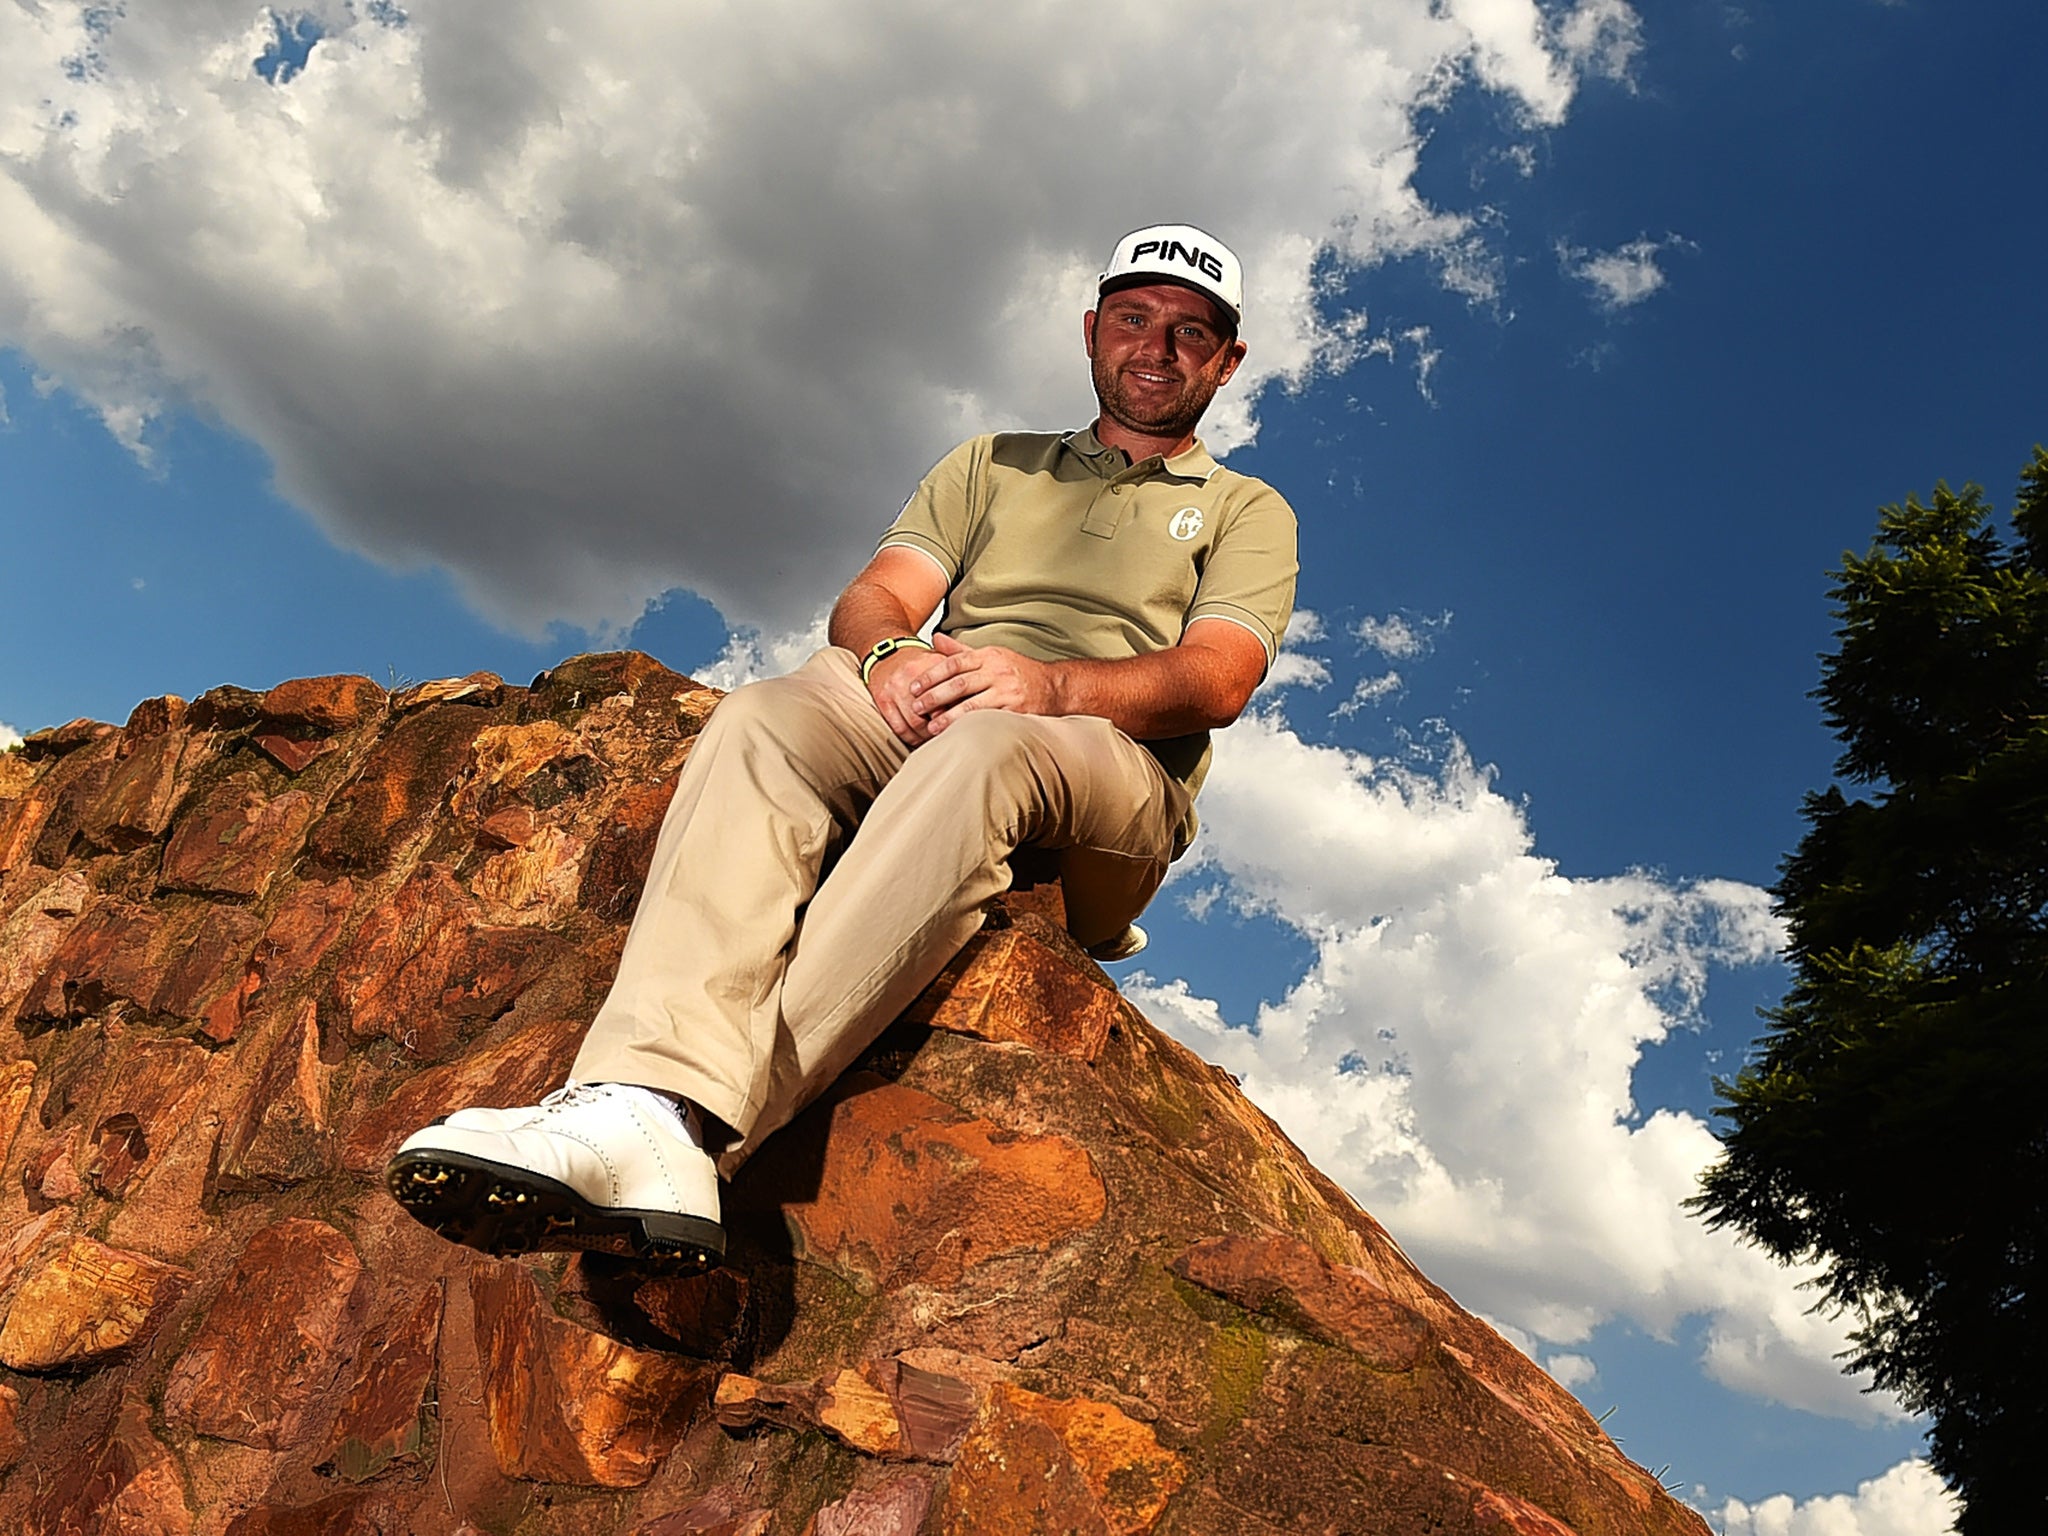 Andy Sullivan has climbed high this year, including in Pretoria, South Africa, back in March